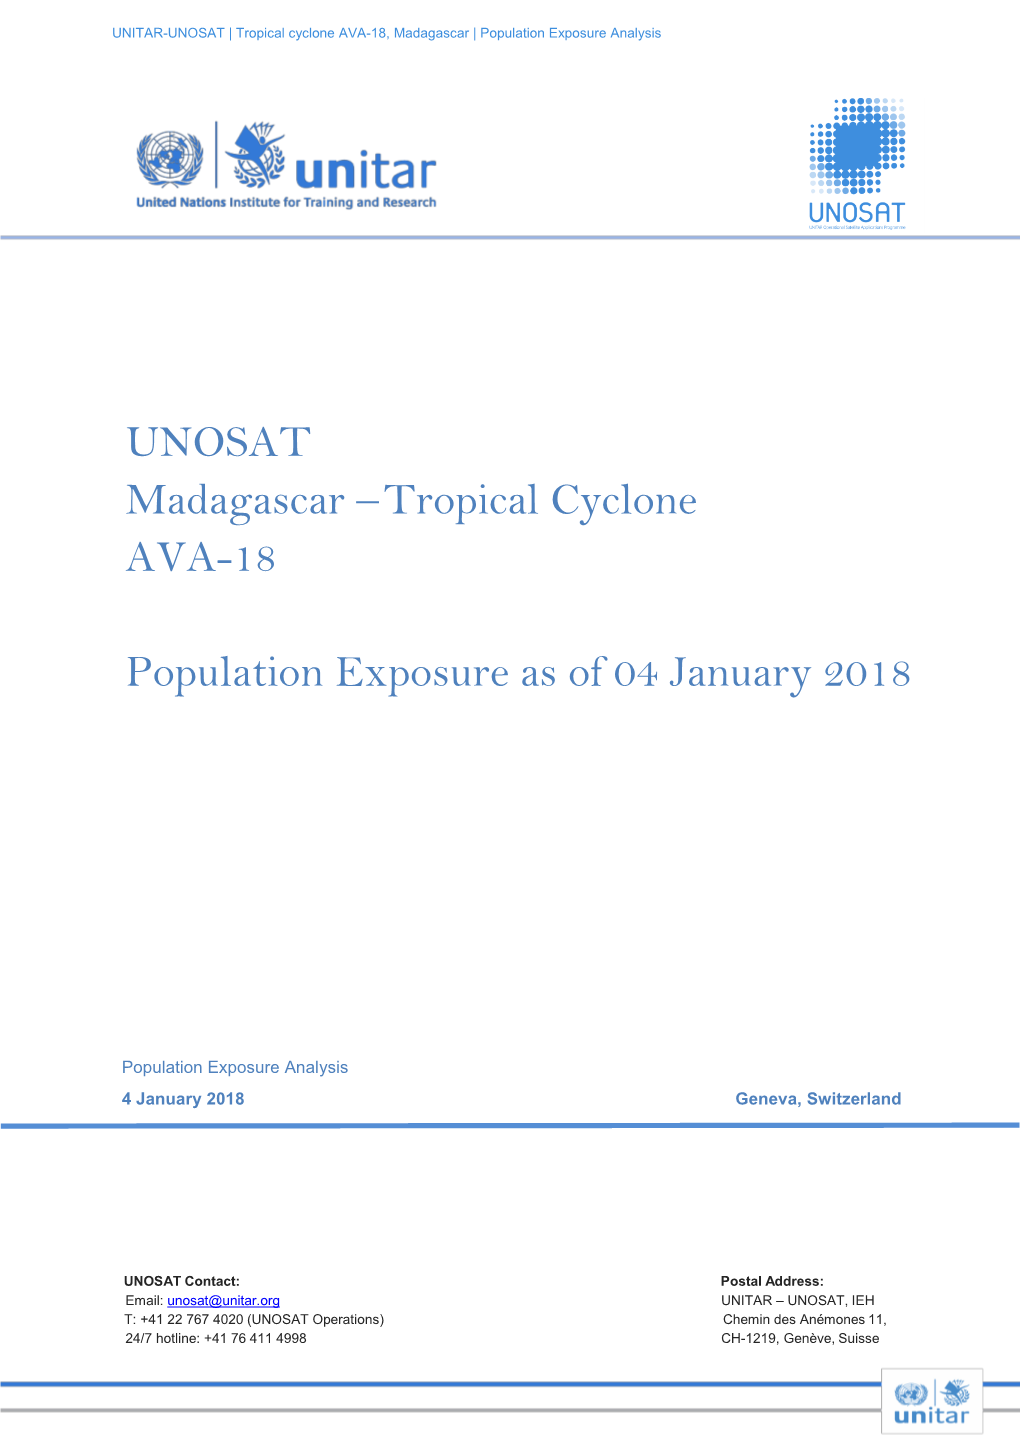 UNOSAT Madagascar – Tropical Cyclone AVA-18 Population Exposure As of 04 January 2018